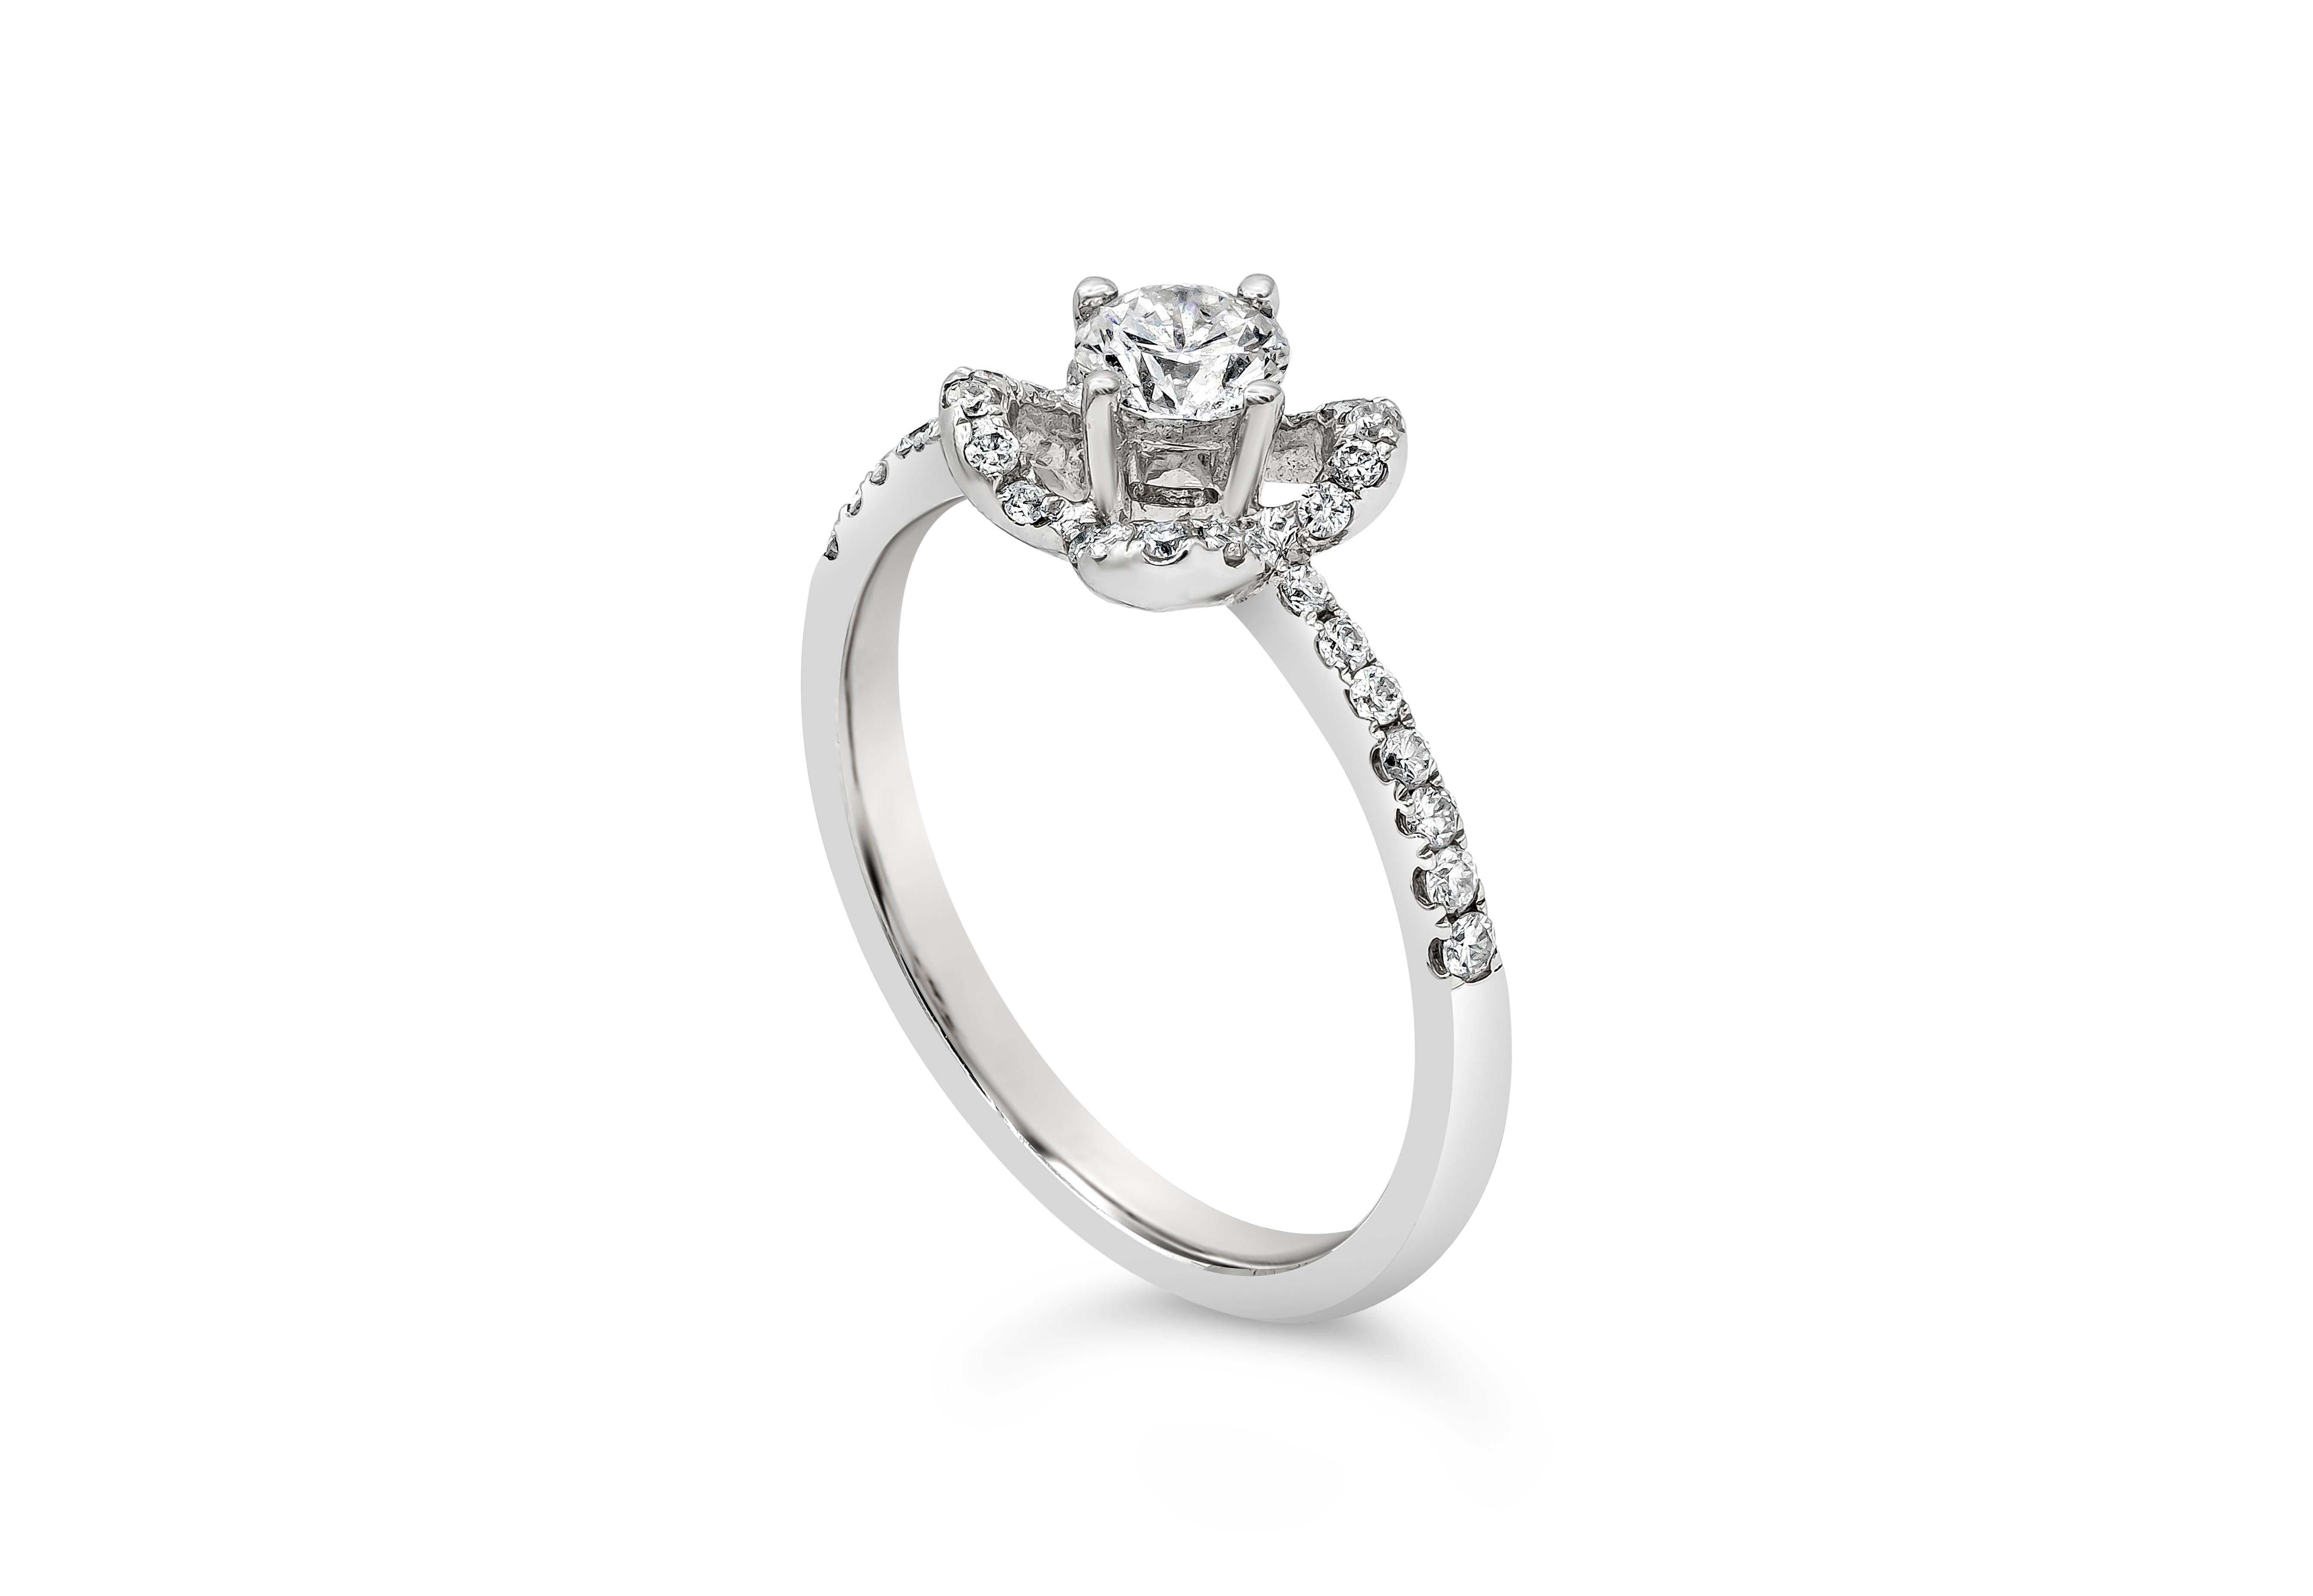 A unique and stylish engagement ring style showcasing a 0.32 carats round diamond, set in a compass setting in a diamond encrusted floral halo. Accent diamonds weigh 0.25 carats total. Made in 18K white gold. Size 6.5 US  and resizable upon